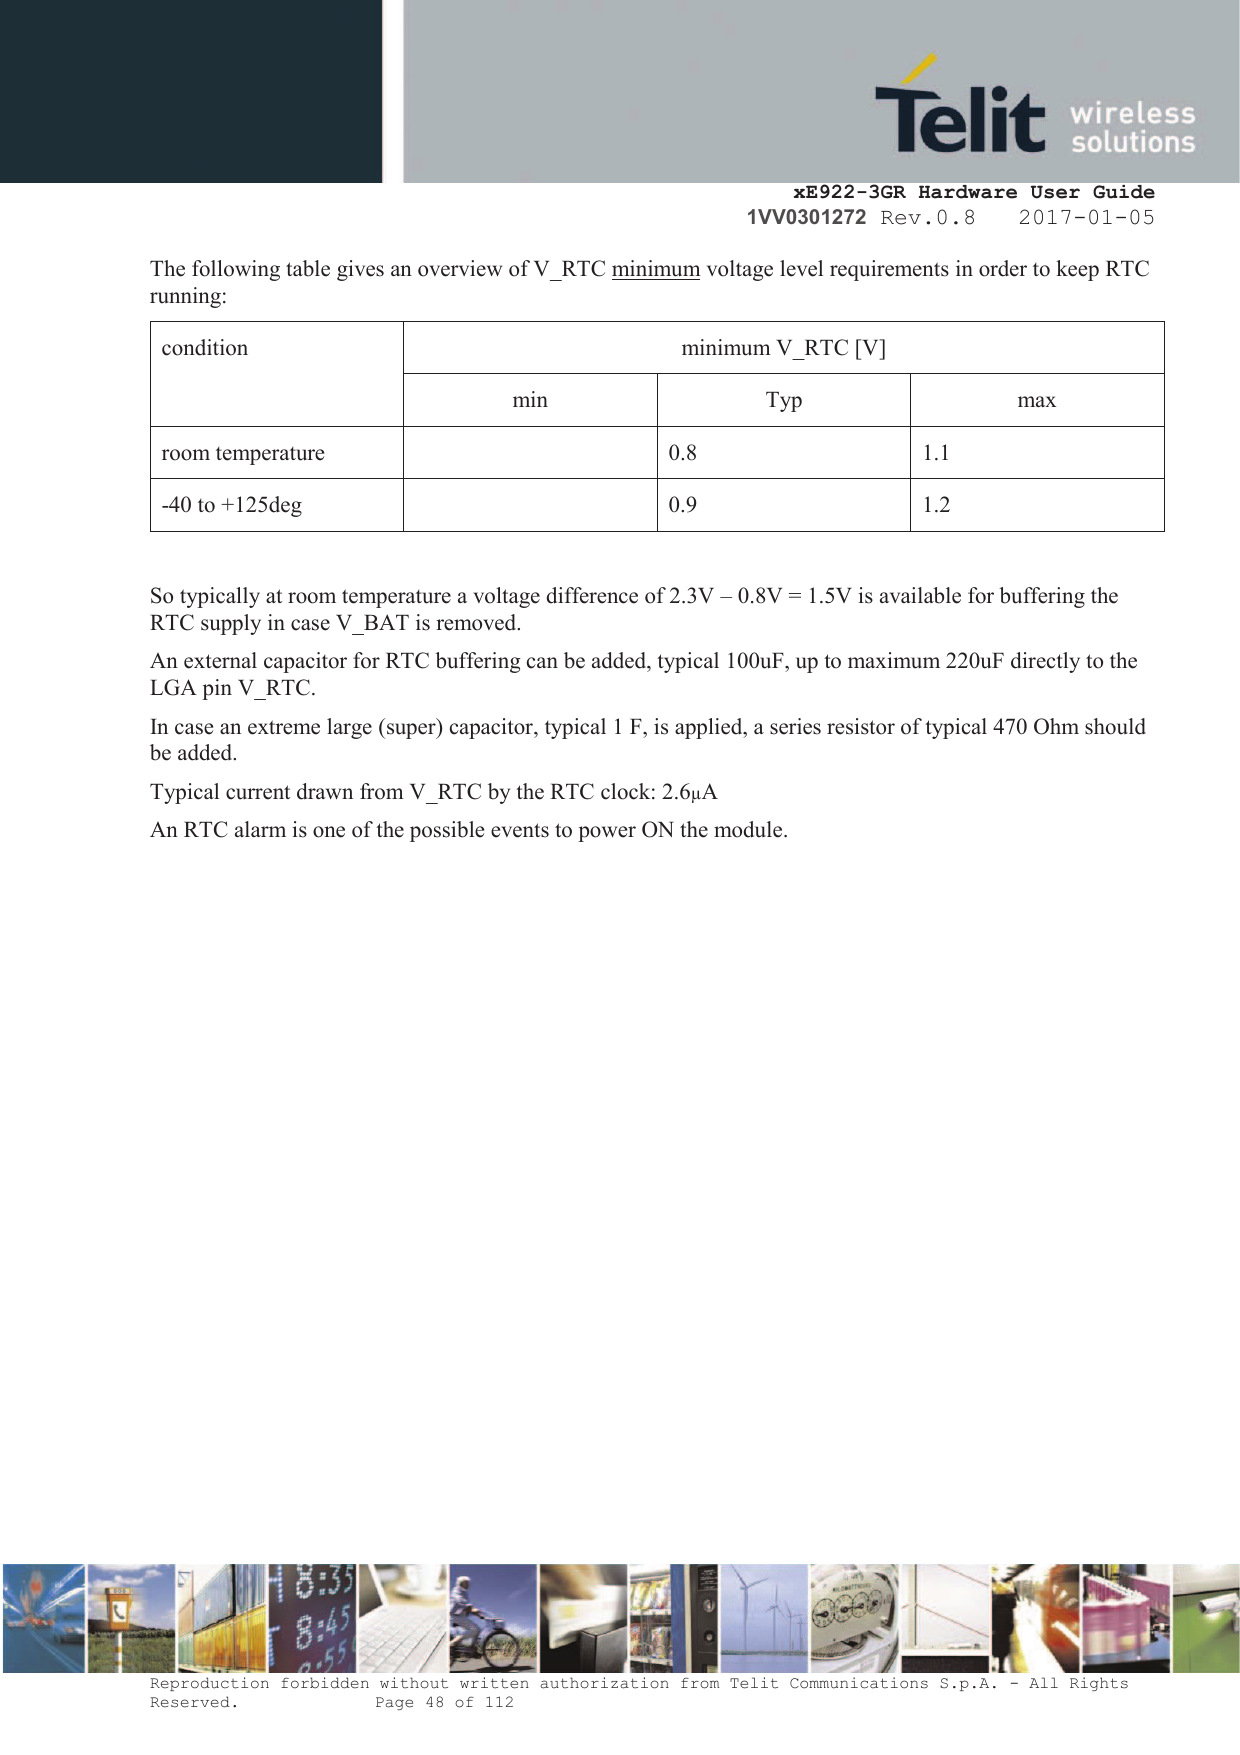     xE922-3GR Hardware User Guide 1VV0301272 Rev.0.8   2017-01-05 Reproduction forbidden without written authorization from Telit Communications S.p.A. - All Rights Reserved.    Page 48 of 112  The following table gives an overview of V_RTC minimum voltage level requirements in order to keep RTC running: condition  minimum V_RTC [V] min  Typ  max room temperature  0.8 1.1 -40 to +125deg  0.9 1.2  So typically at room temperature a voltage difference of 2.3V – 0.8V = 1.5V is available for buffering the RTC supply in case V_BAT is removed. An external capacitor for RTC buffering can be added, typical 100uF, up to maximum 220uF directly to the LGA pin V_RTC.  In case an extreme large (super) capacitor, typical 1 F, is applied, a series resistor of typical 470 Ohm should be added. Typical current drawn from V_RTC by the RTC clock: 2.6µA An RTC alarm is one of the possible events to power ON the module.   